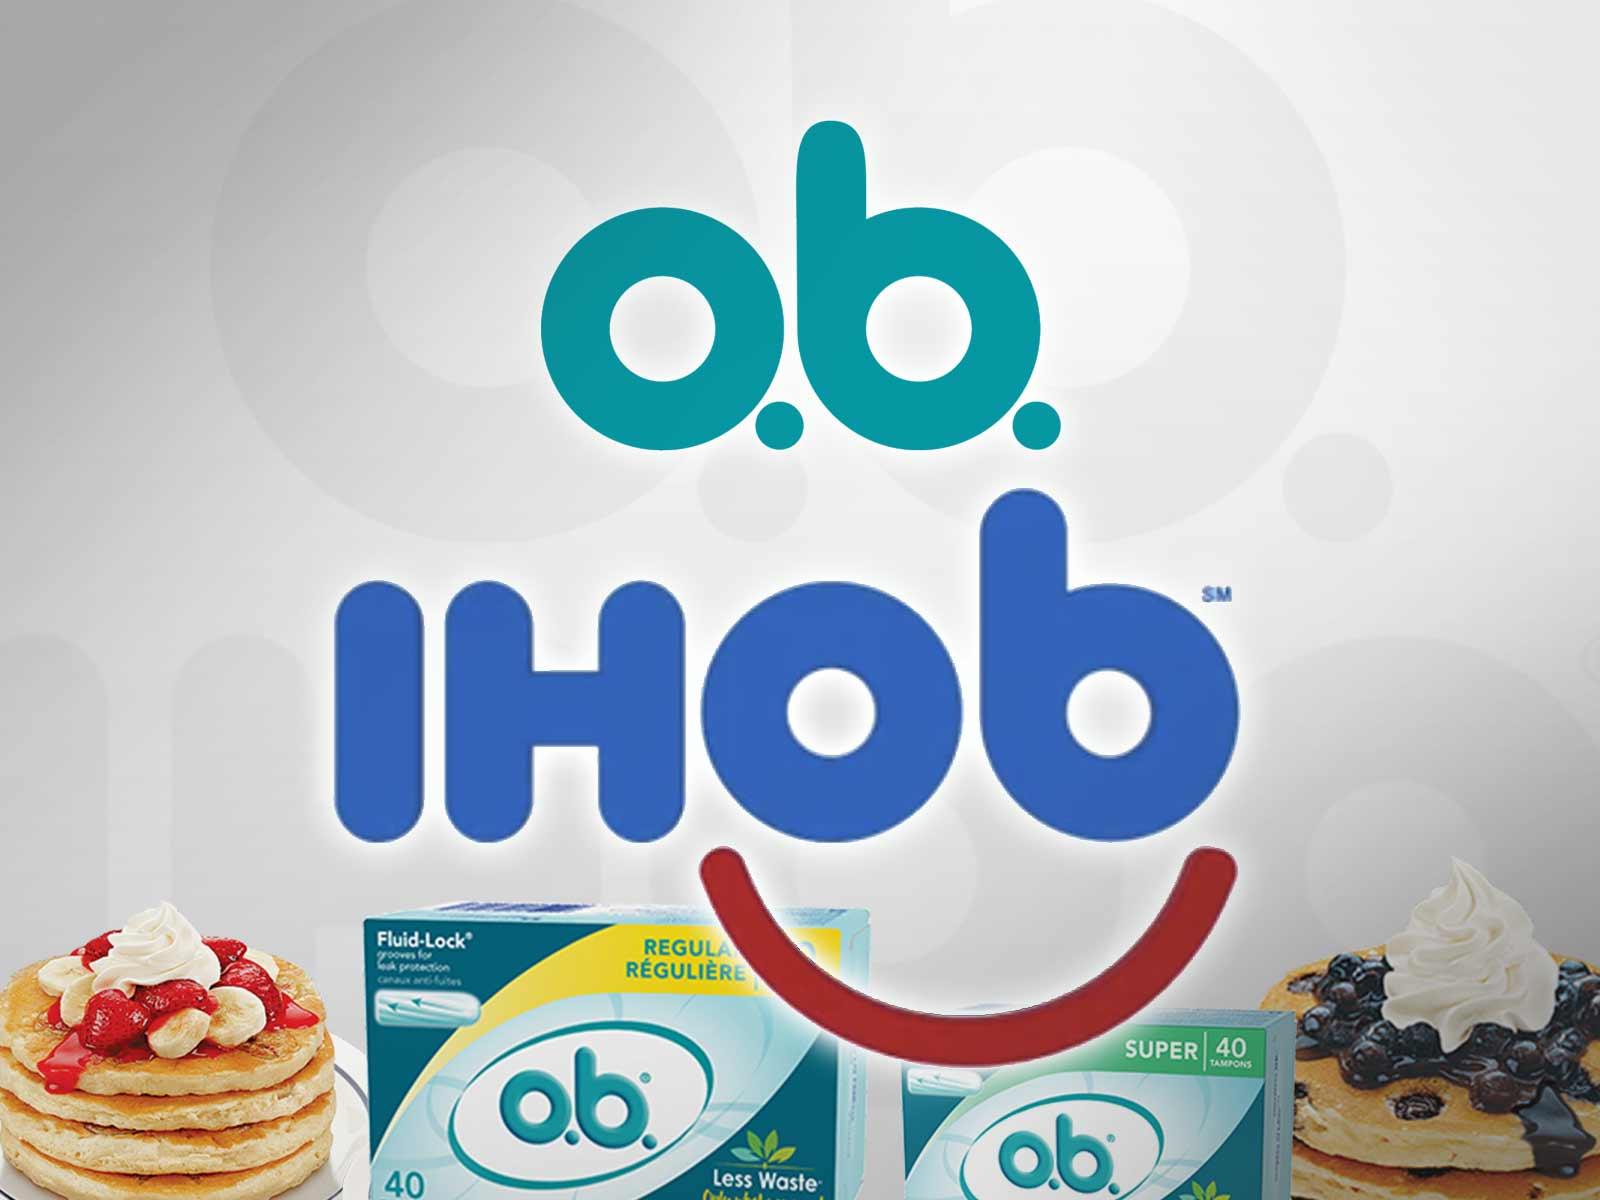 O.B. Tampons 'Flattered' That IHOP's New Logo Looks Like Theirs, But Offers  a Warning  - The Blast